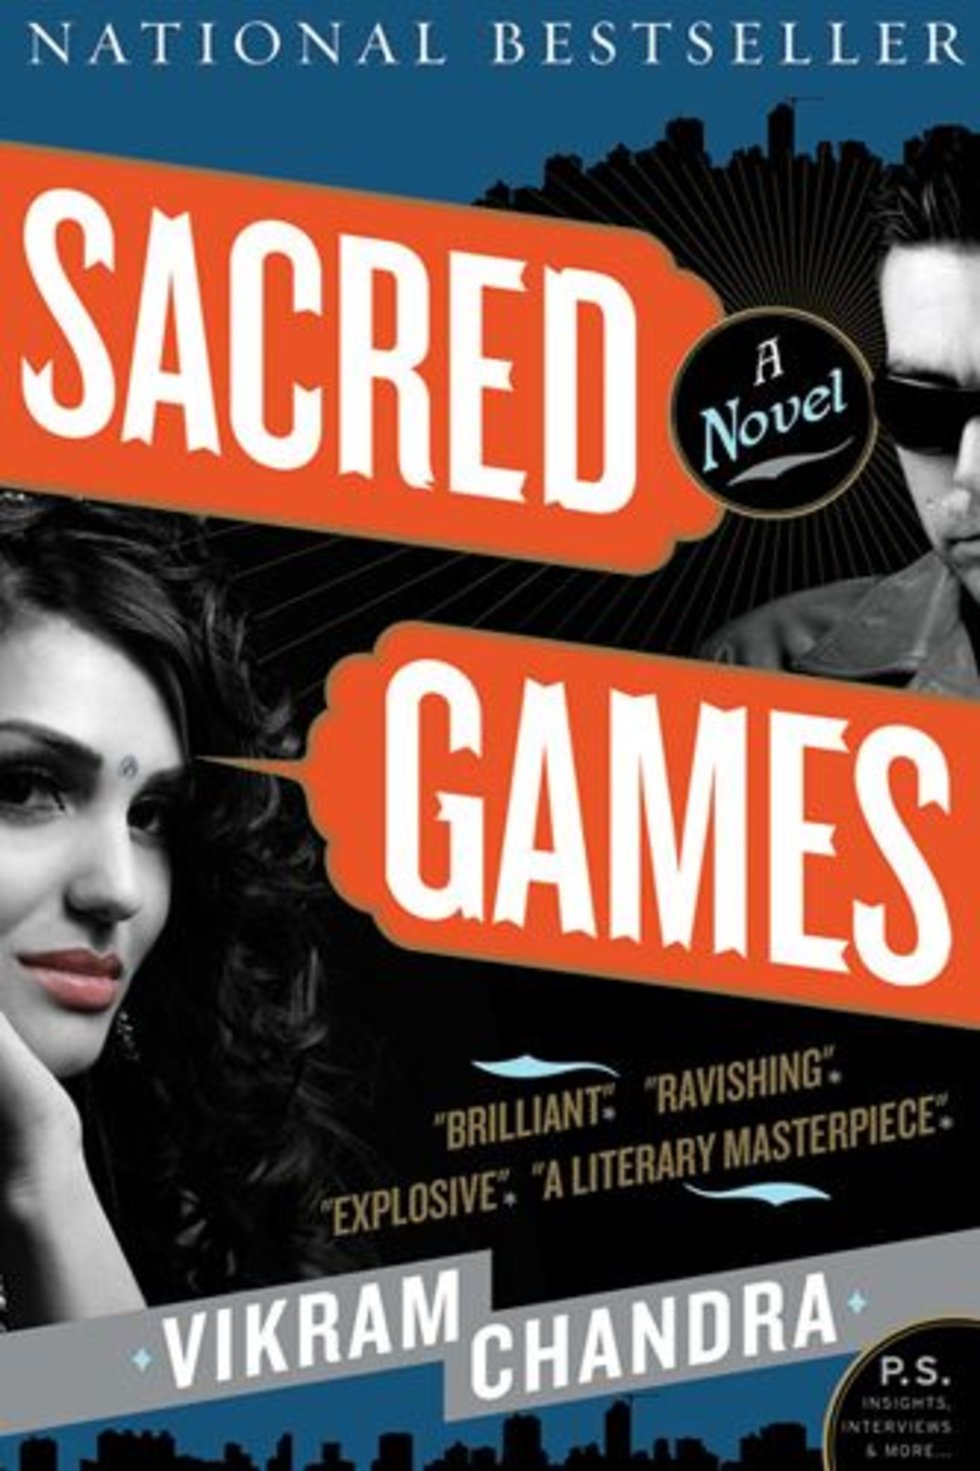 Sacred Games Netflix Orders First Original Series from India